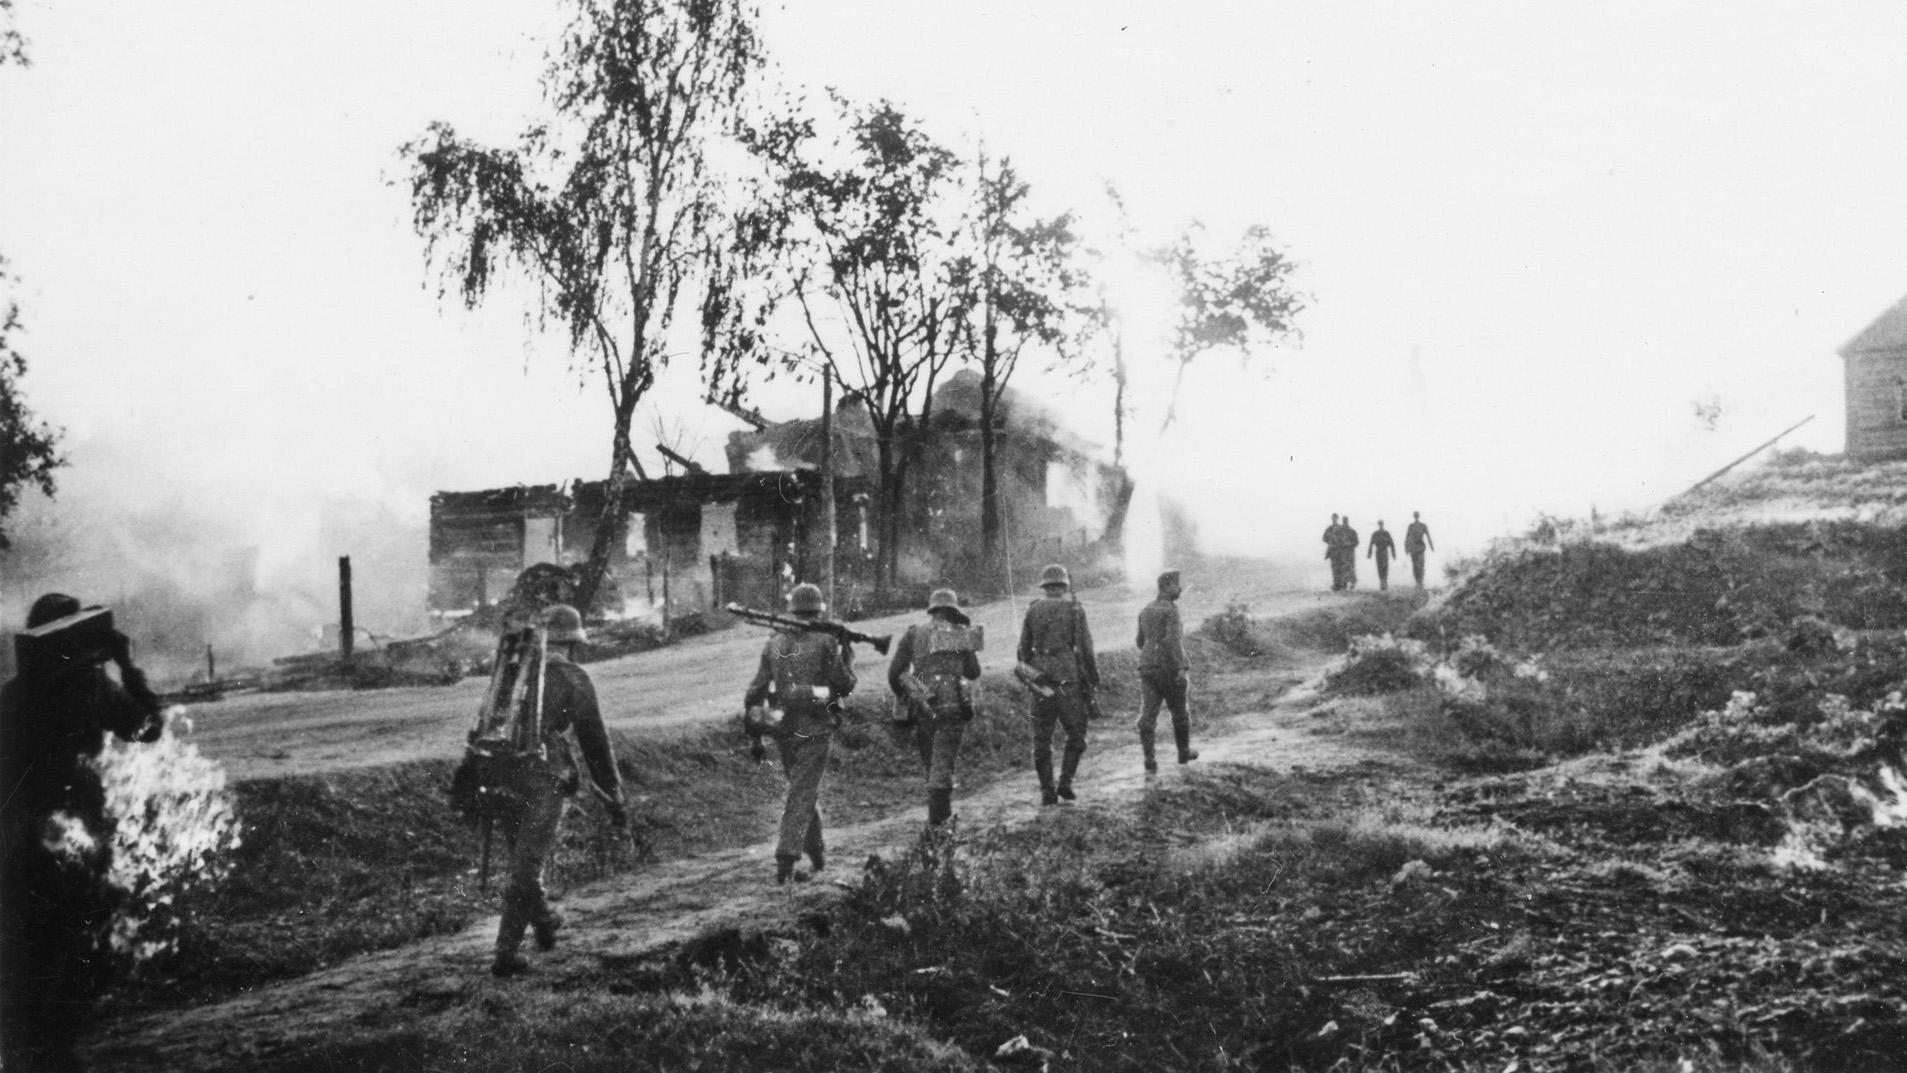 A line of German soldiers marches past a burning Russian building somewhere on the Eastern Front. The vast spaces of the USSR swallowed German armies and led to mass casualties. Few German POWs lived to return home.